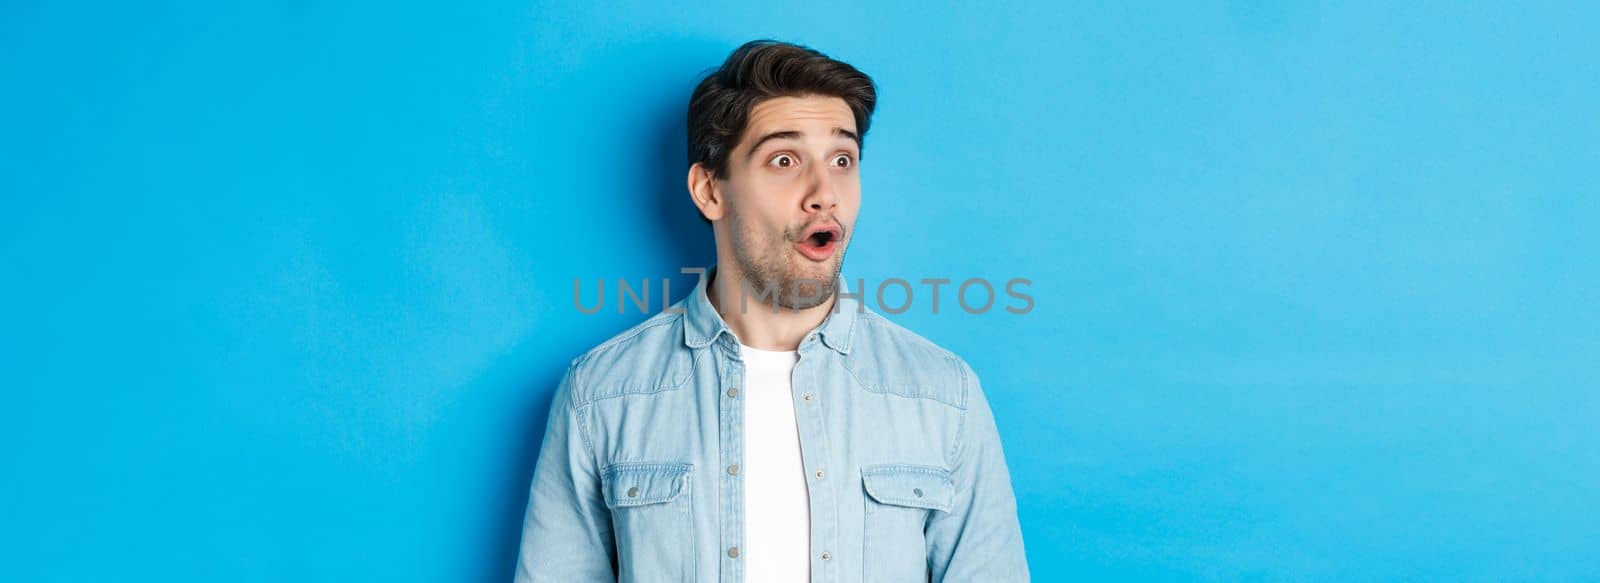 Close-up of surprised handsome man looking impressed left, open mouth fascinated, wearing casual outfit, standing over blue background.